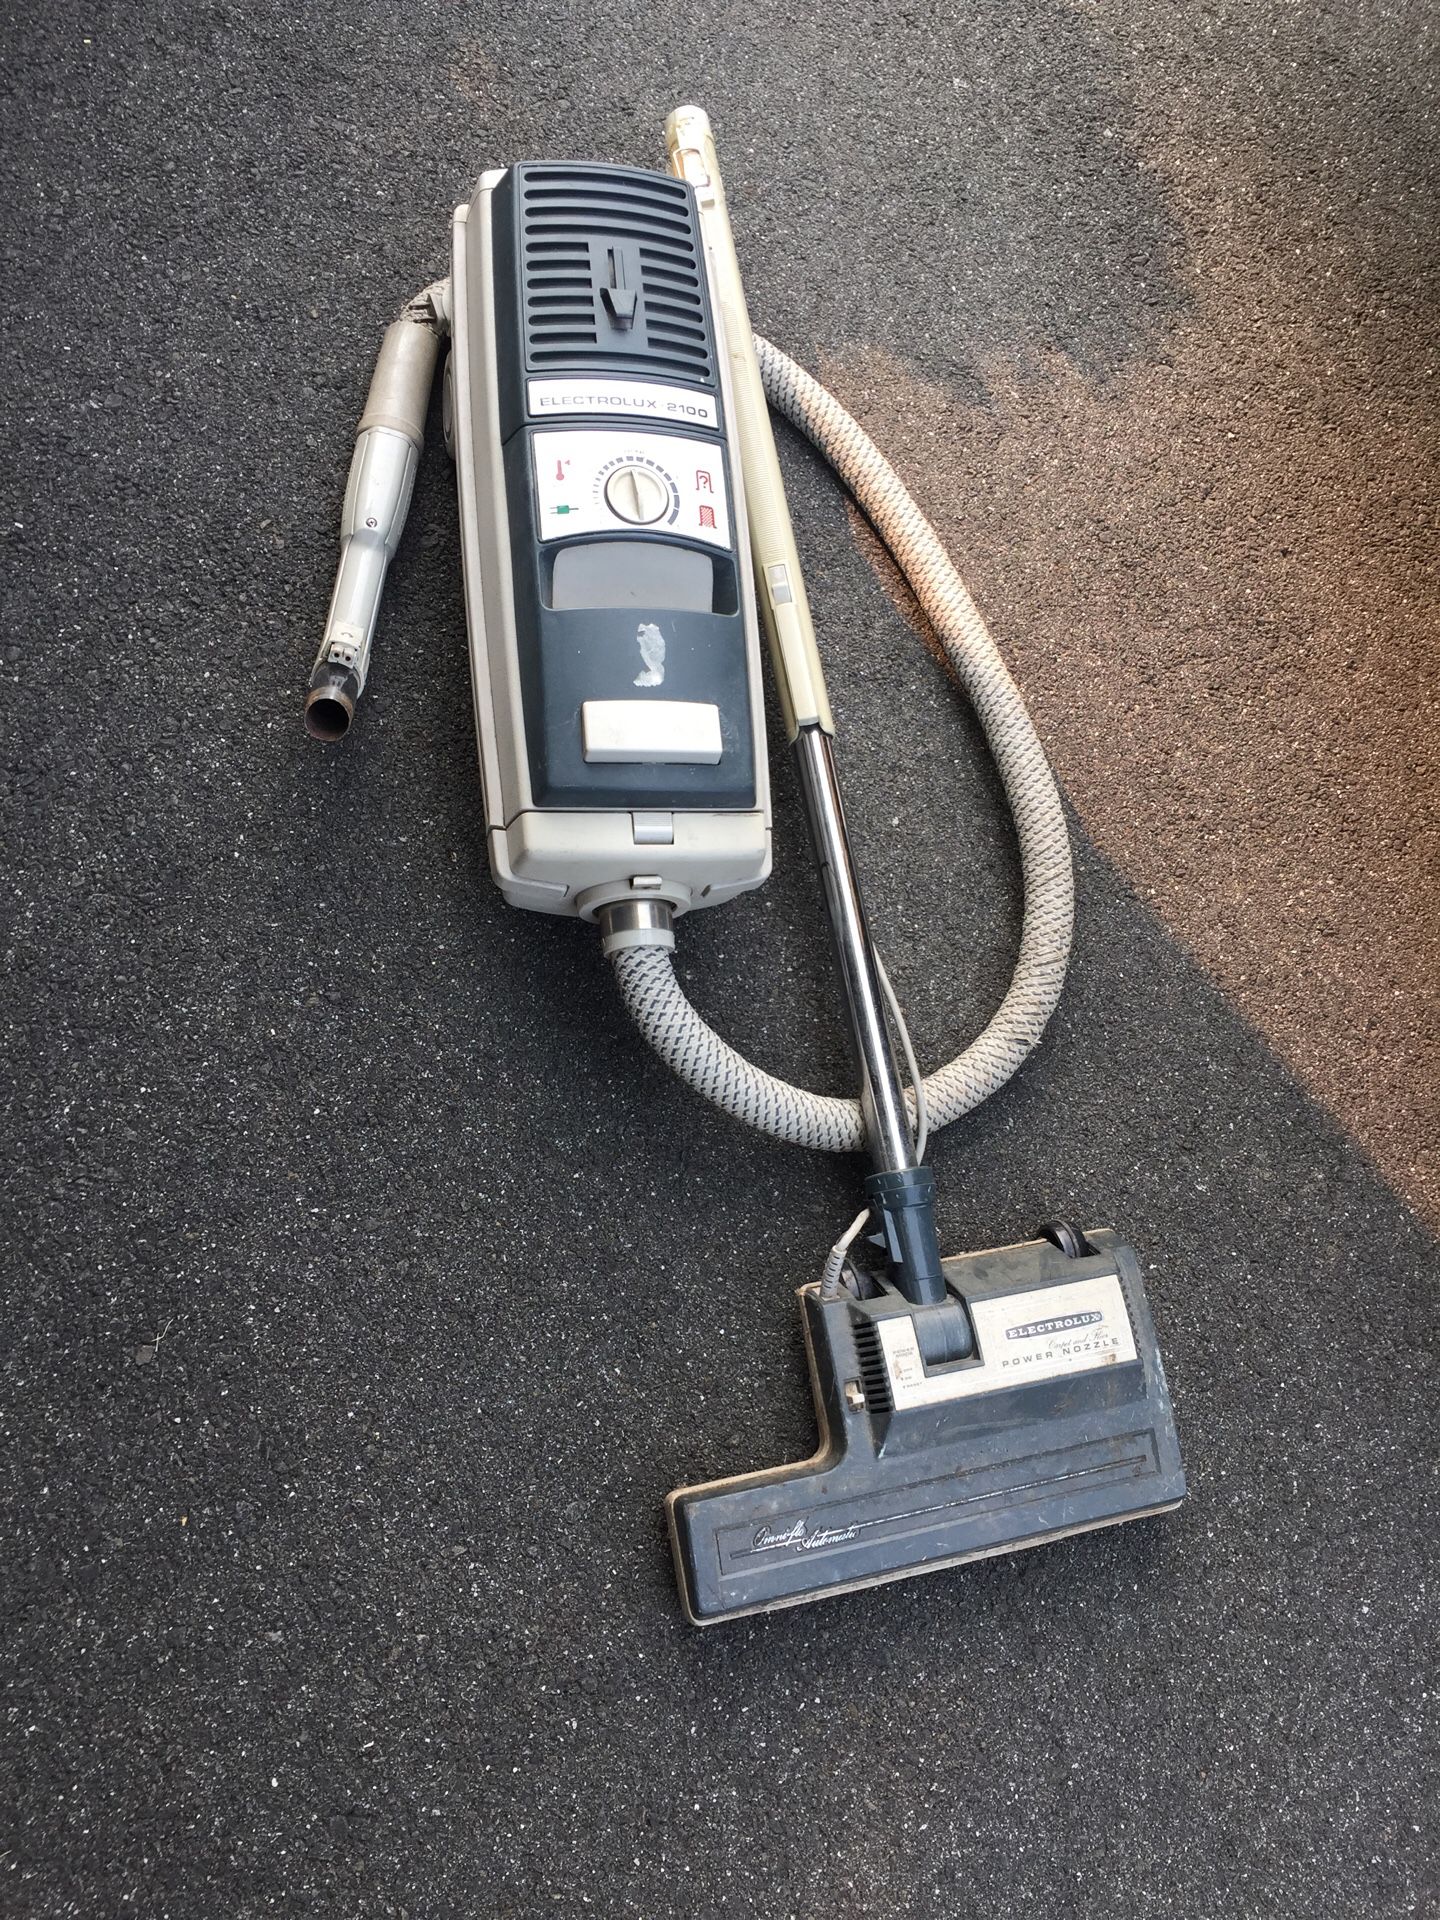 CANISTER VACUUM CLEANER ELECTROLUX 2100 VACUUM CLEANER